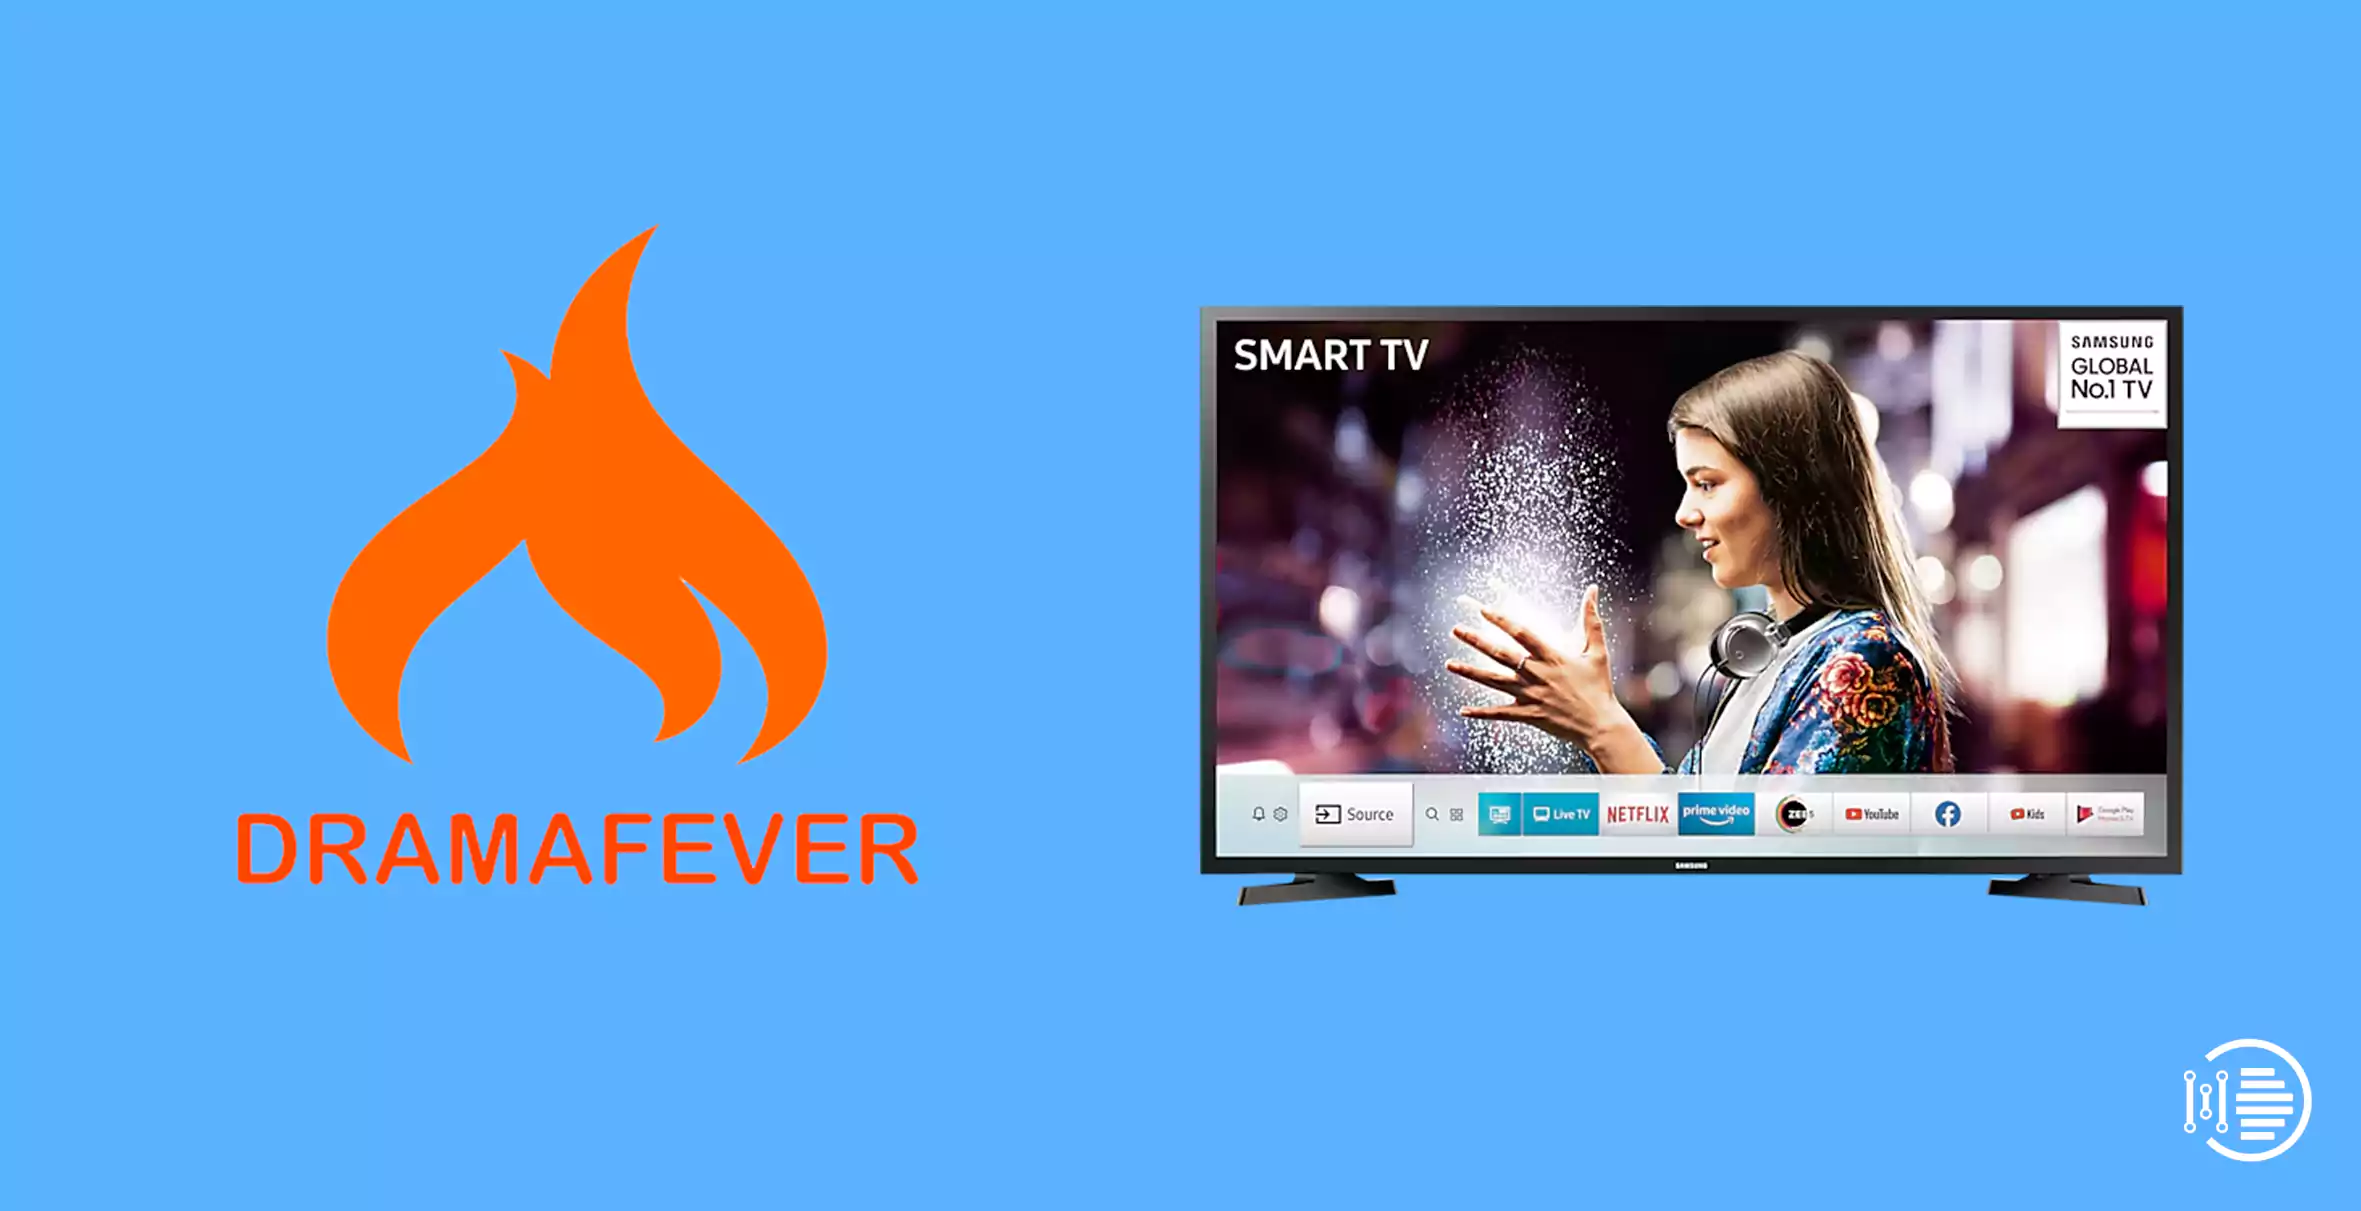 How to Install and Watch Dramafever App on Samsung Smart TV in 2022